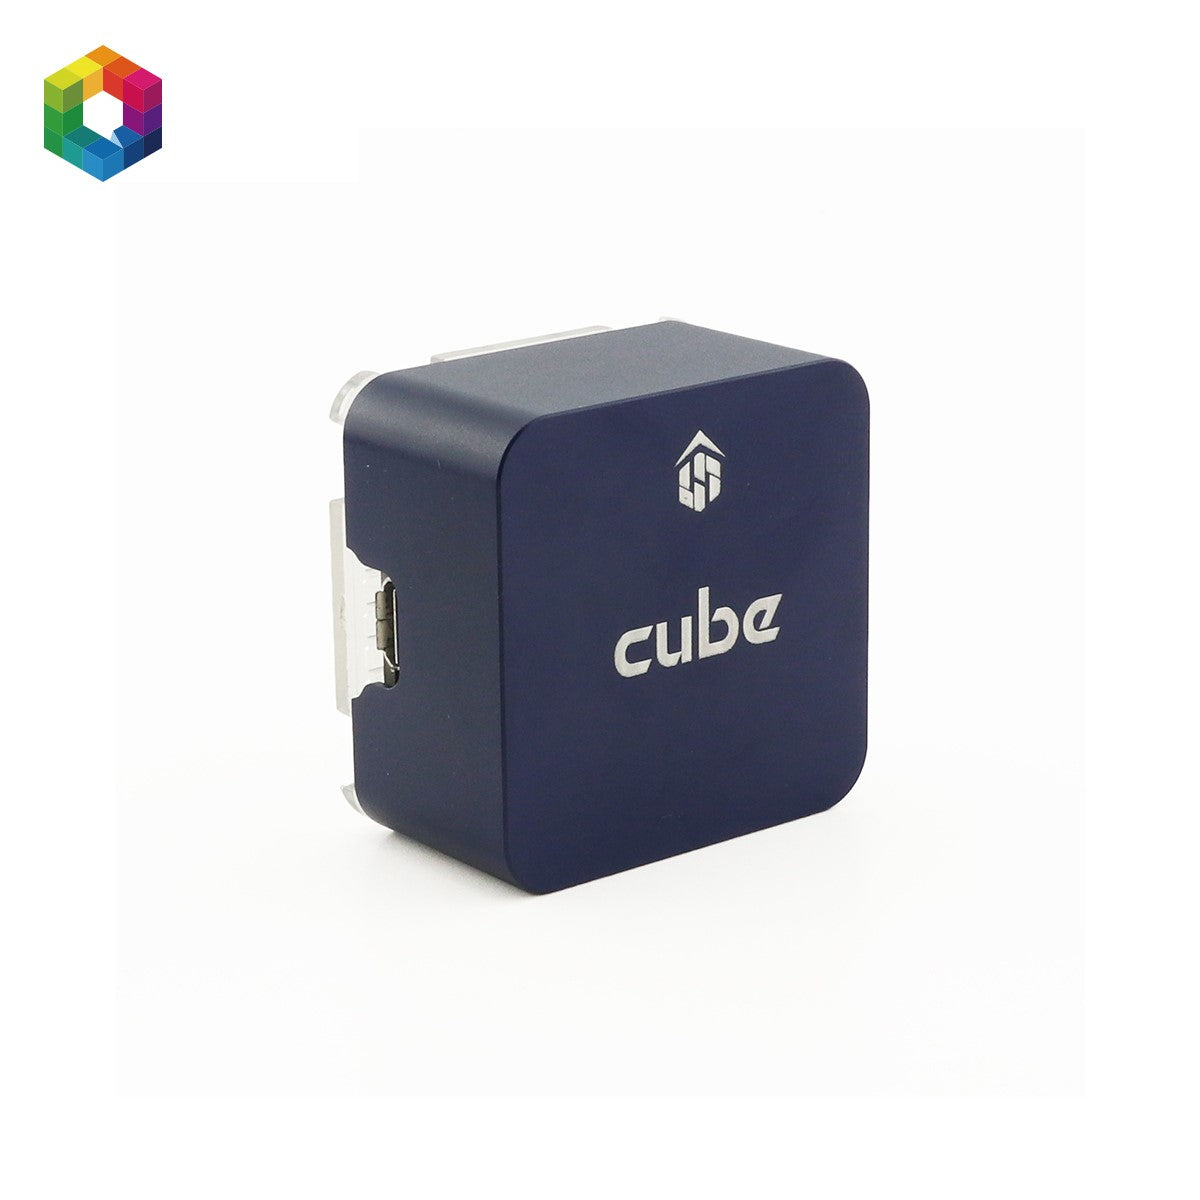 The Cube Blue